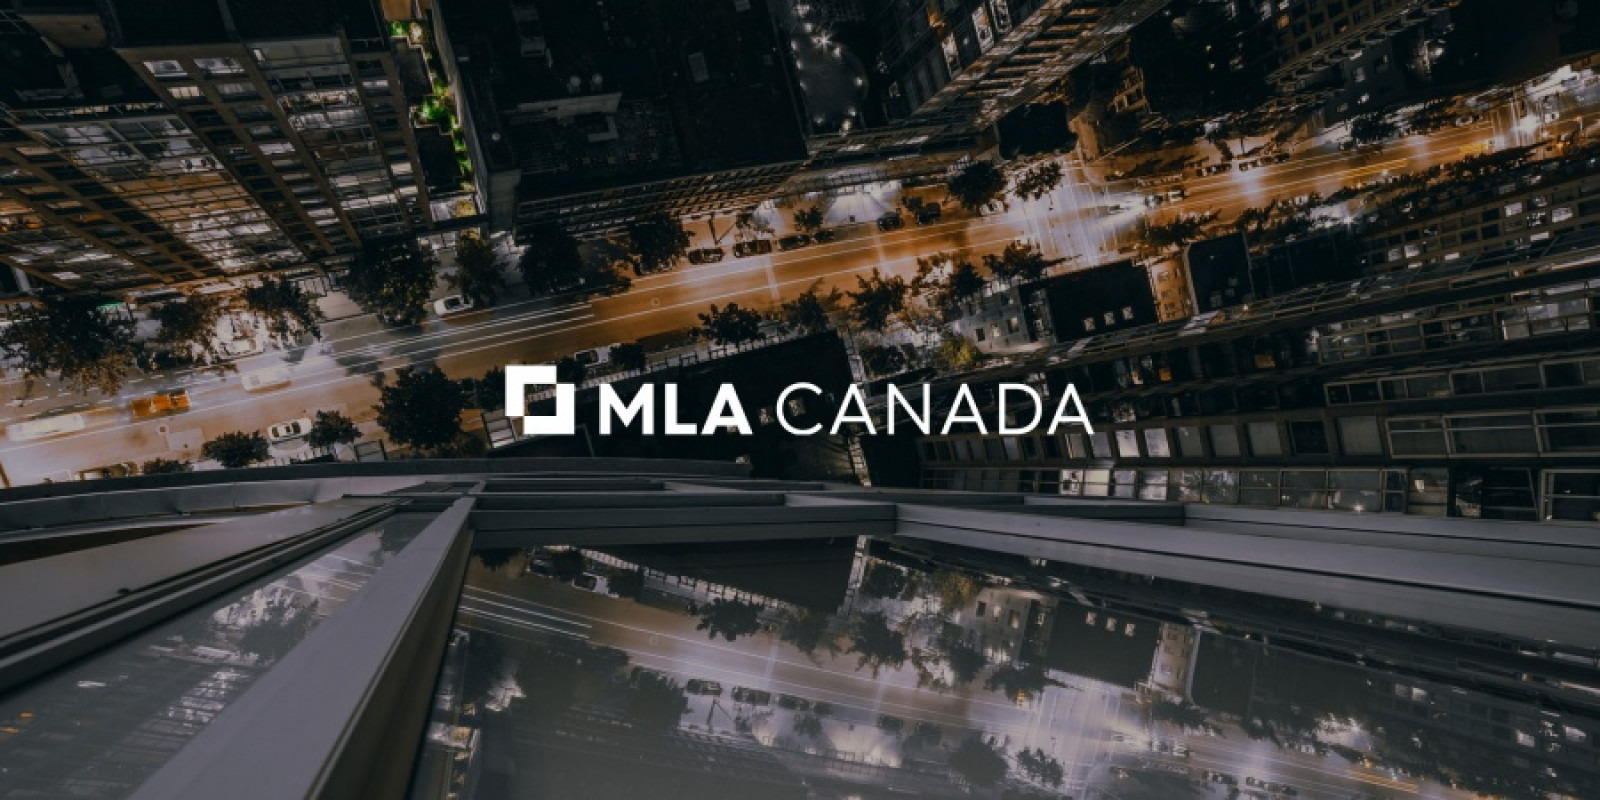 meaning of mla in canada